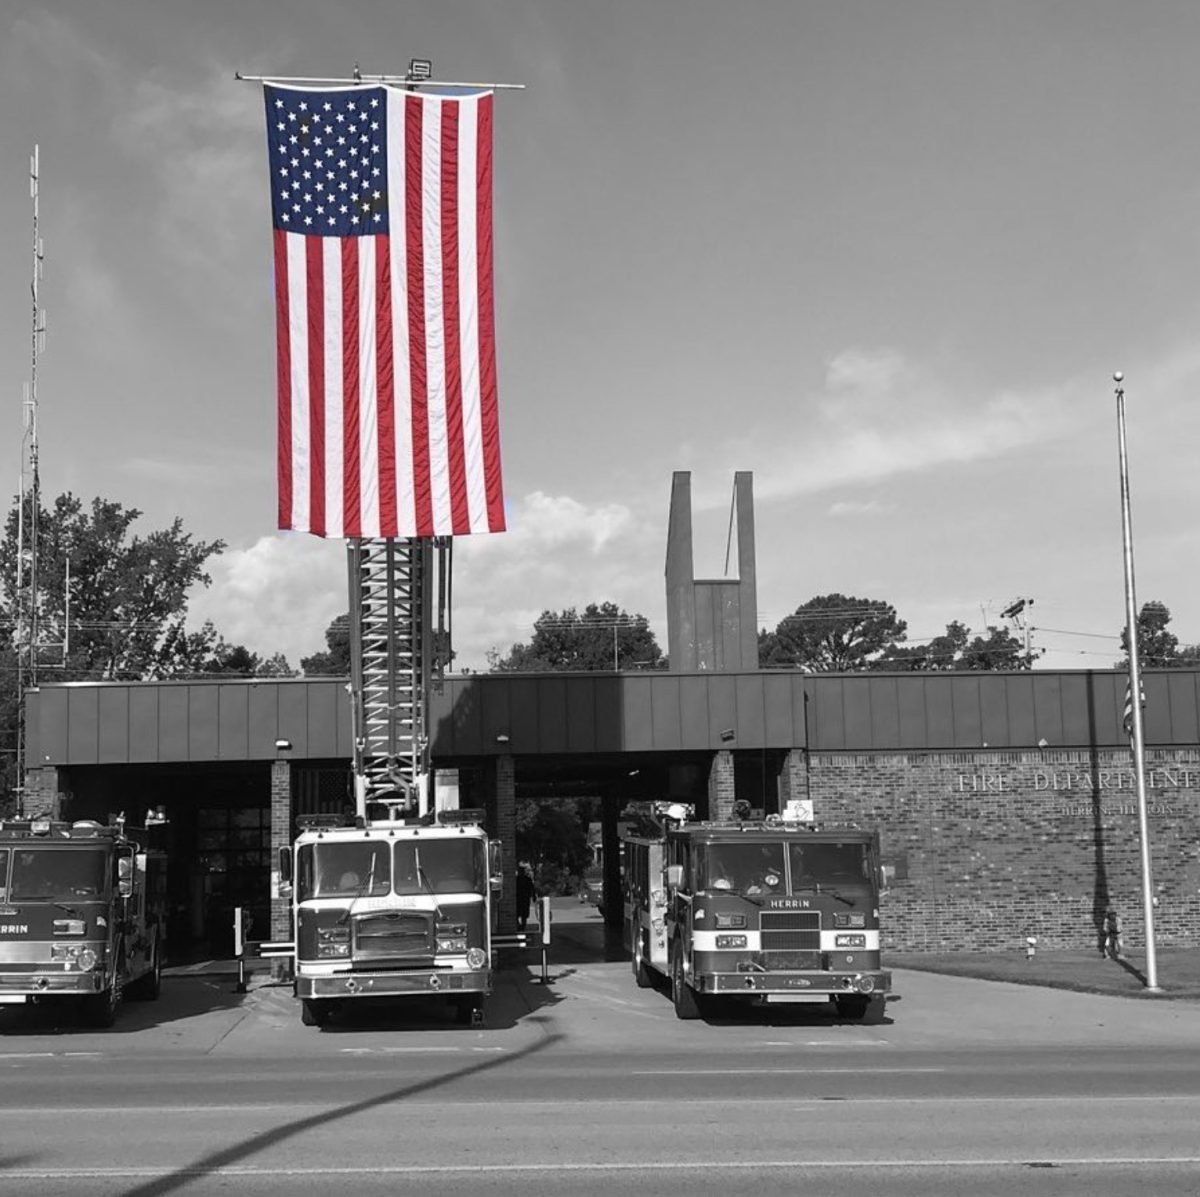 The Herrin Fire Department raises the American flag in tribute and in remembrance of the lives lost to the 9/11 attacks.